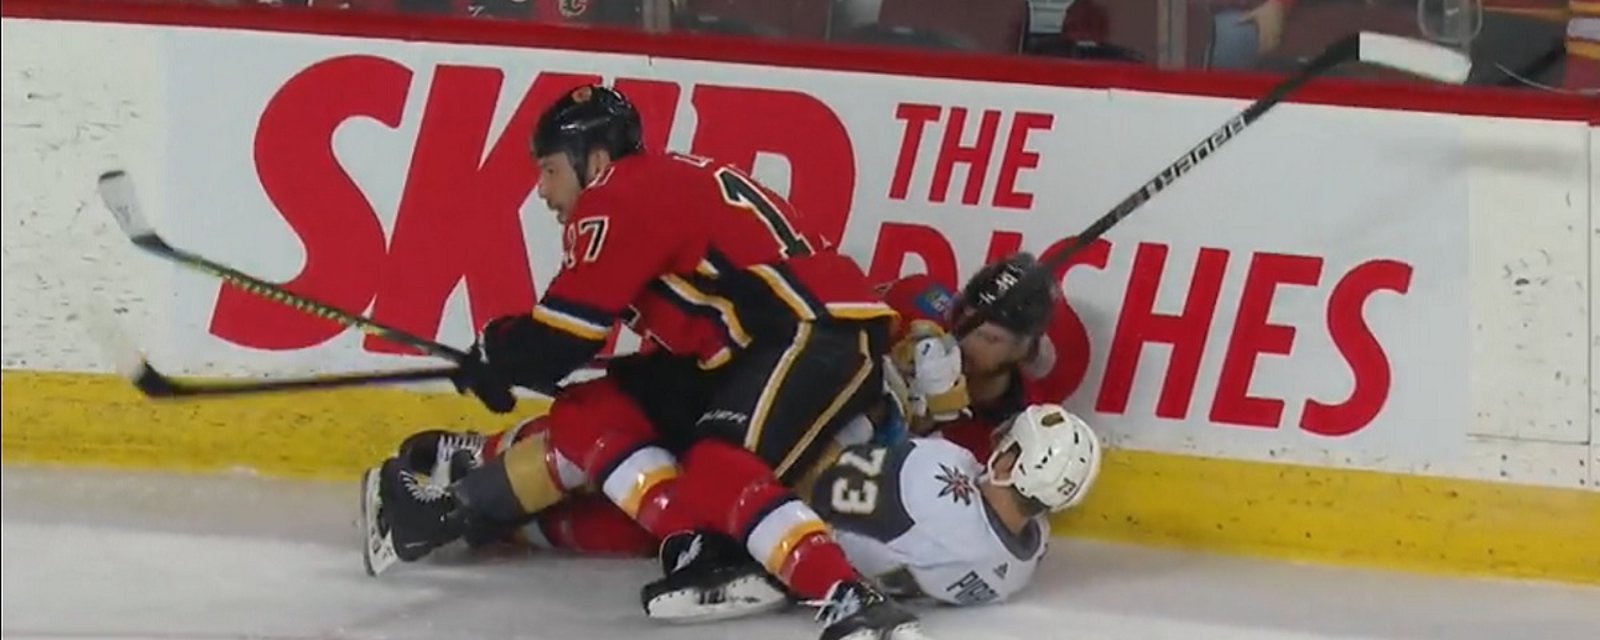 Lucic levels Pirri but injures his own teammate in the process.